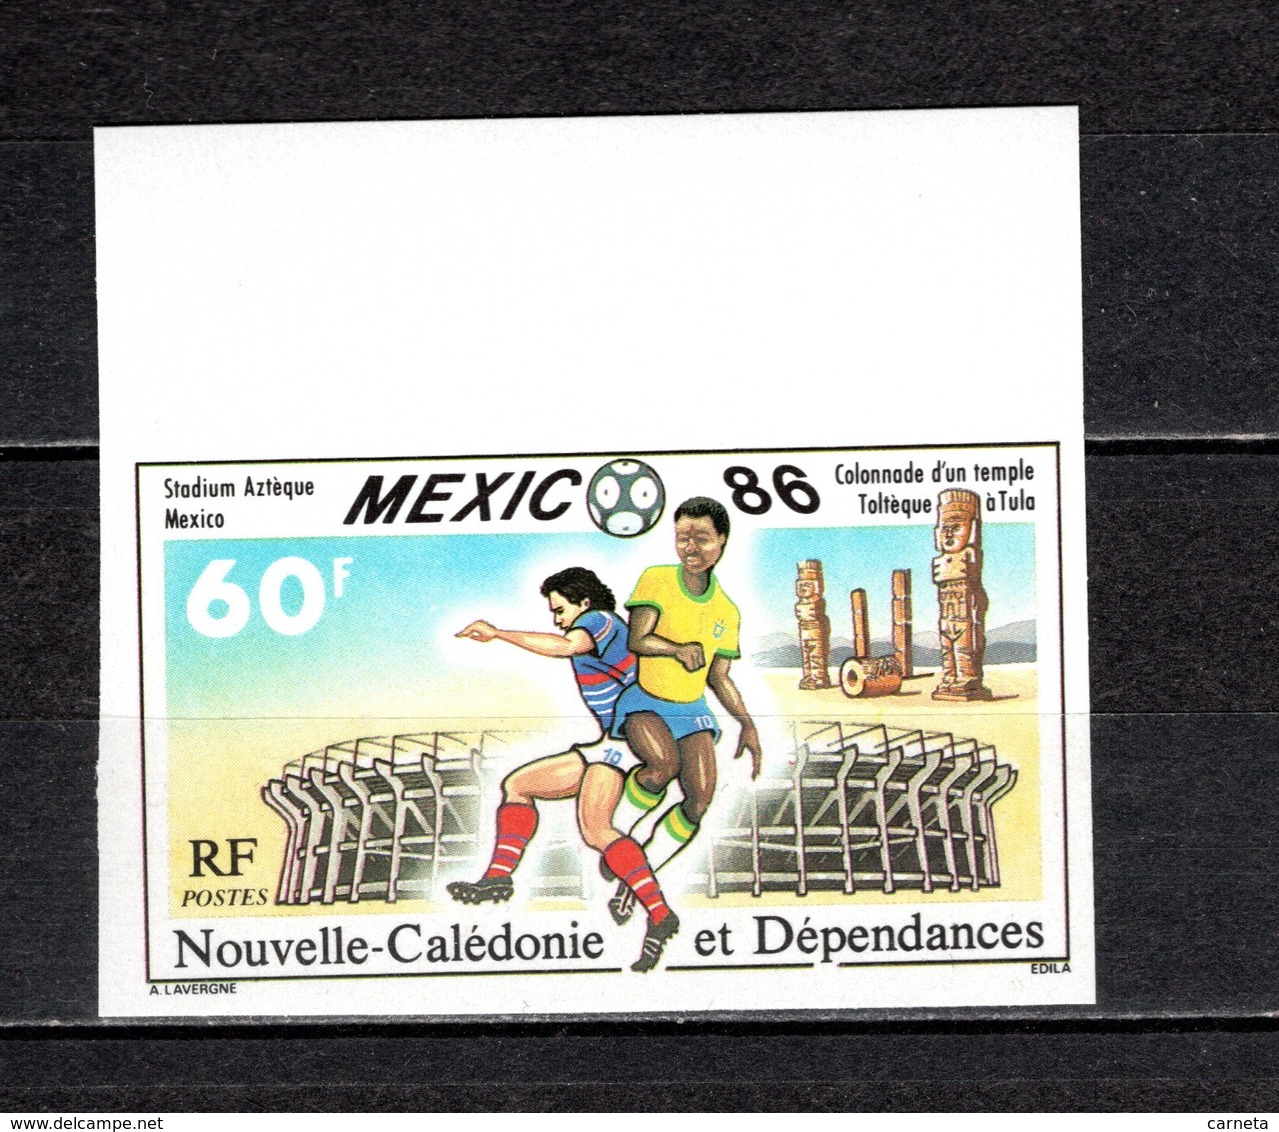 Nlle CALEDONIE N° 518  NON DENTELE   NEUF SANS CHARNIERE  COTE 20.00€  FOOTBALL - Imperforates, Proofs & Errors